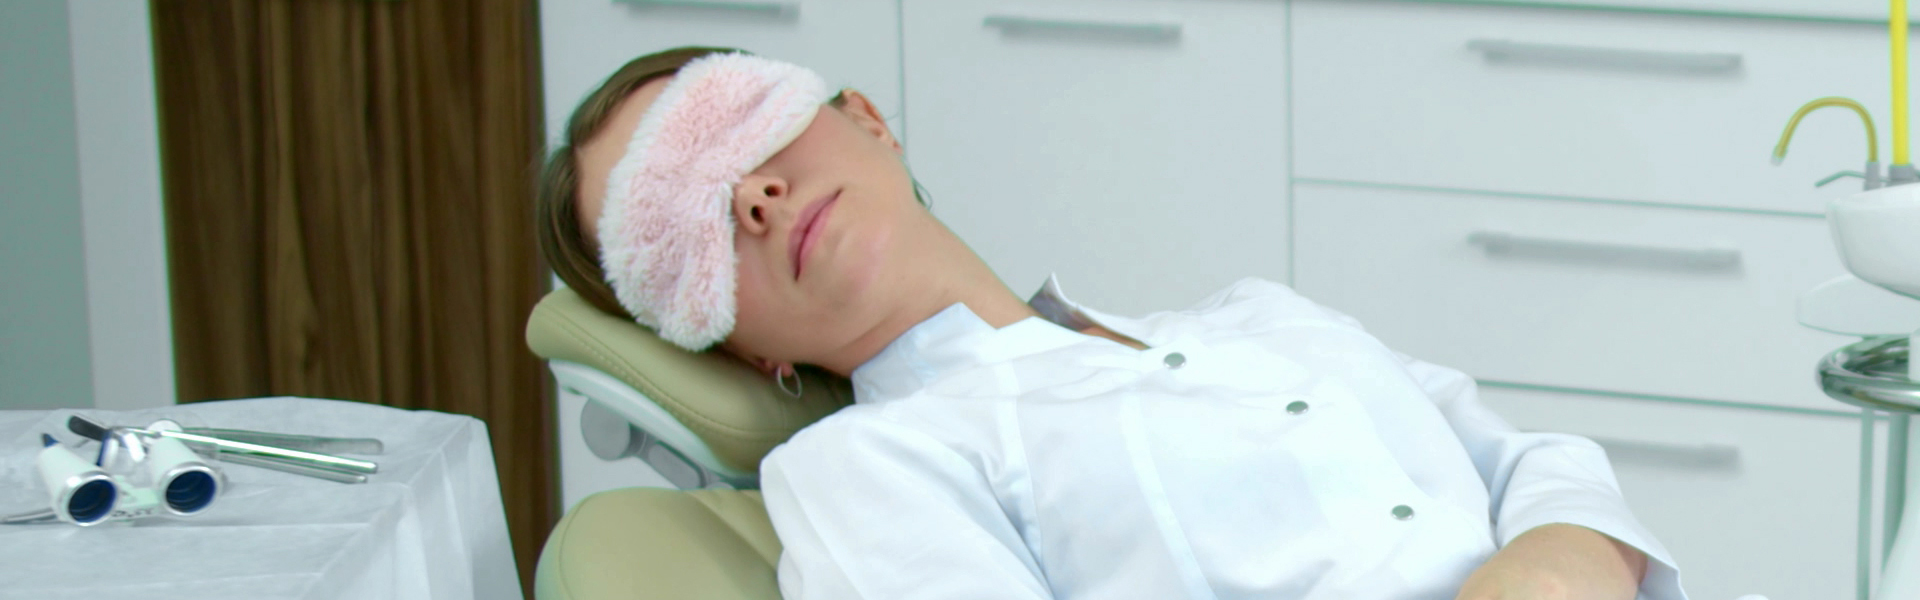 Sedation Dentistry—A Treatment Option for Dental Phobia and Anxiety